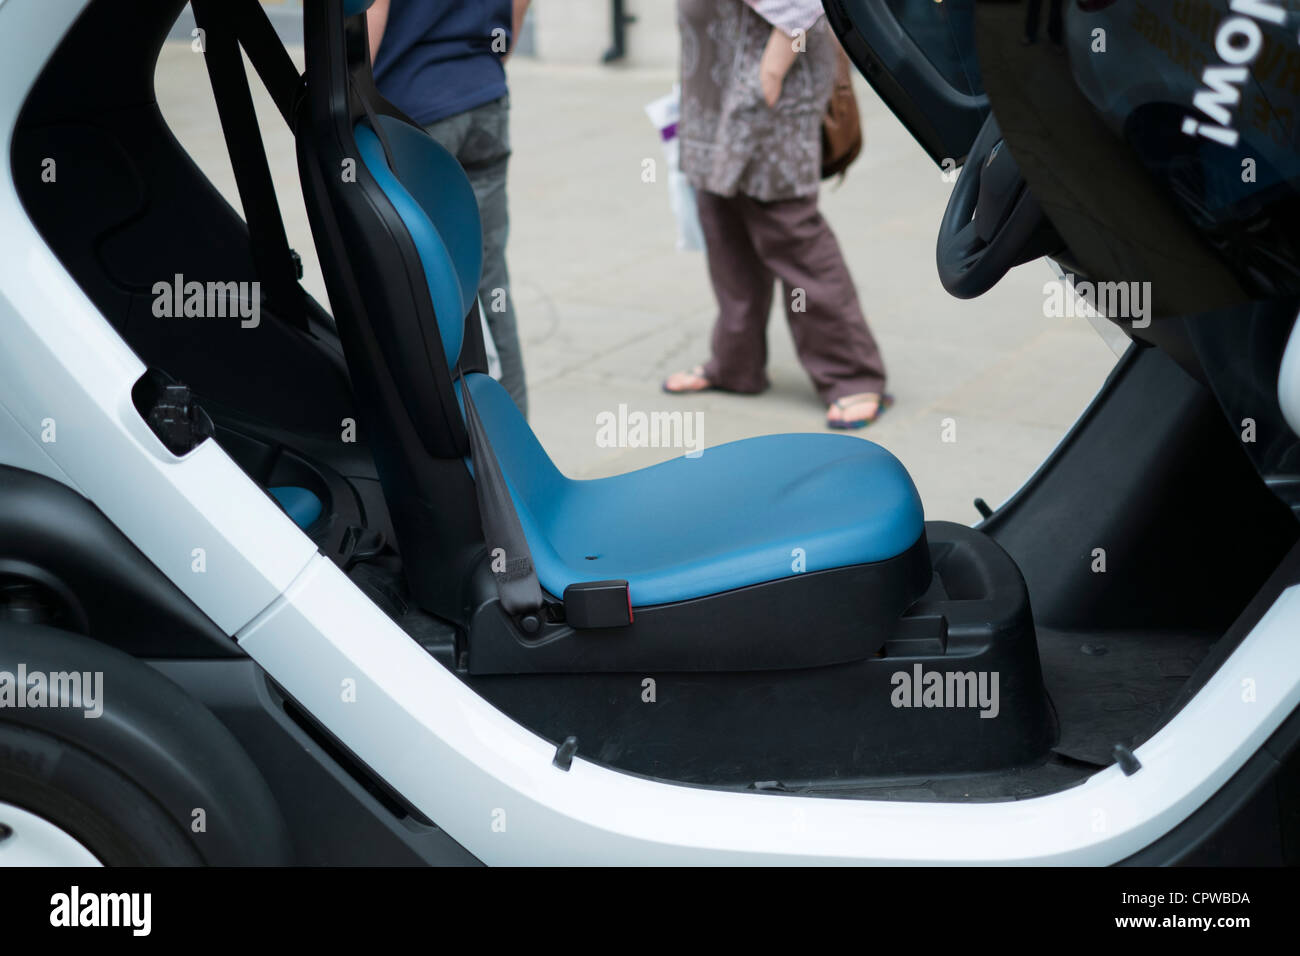 A Renault Twizy Electric Car Showing the Drivers Seat. Stock Photo